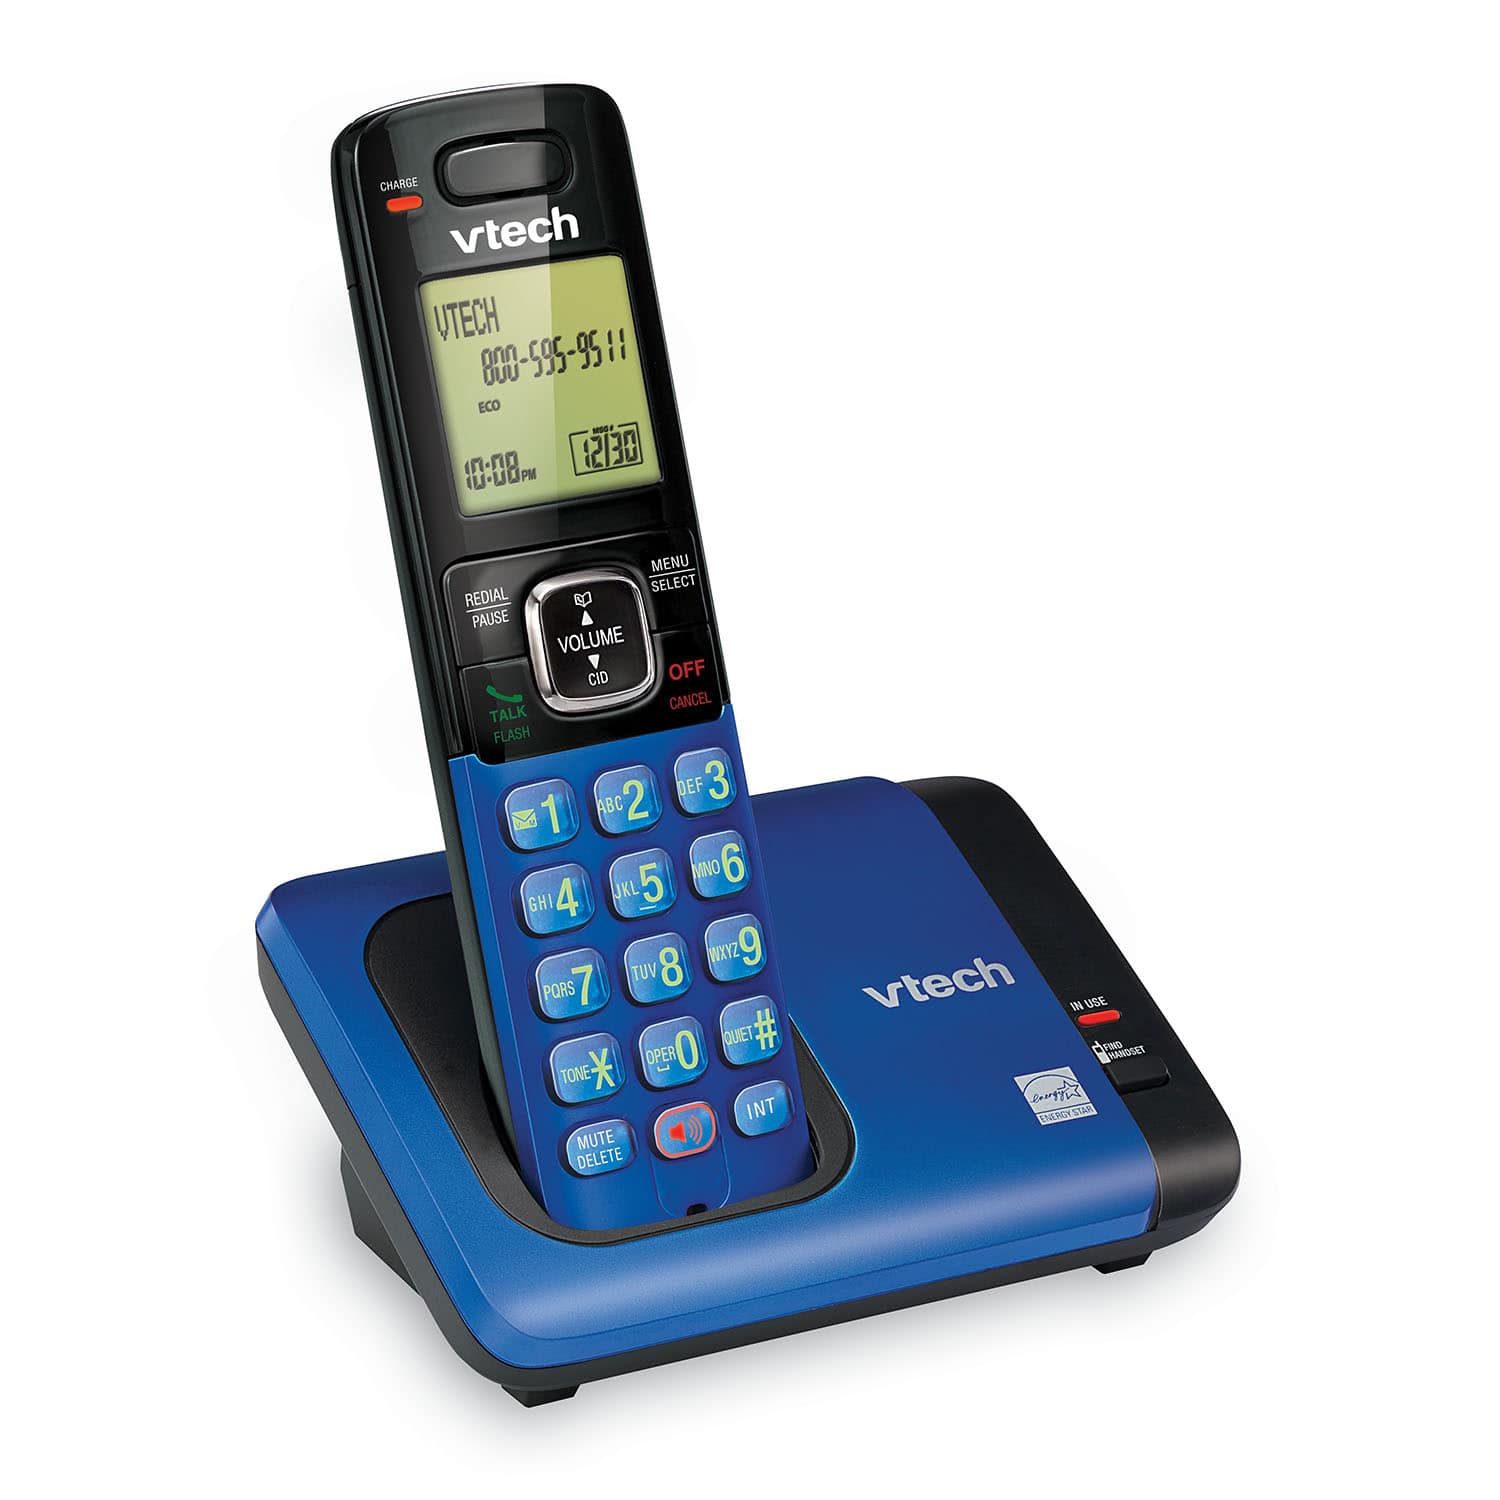 Cordless Phone with Caller ID/Call Waiting - view 3